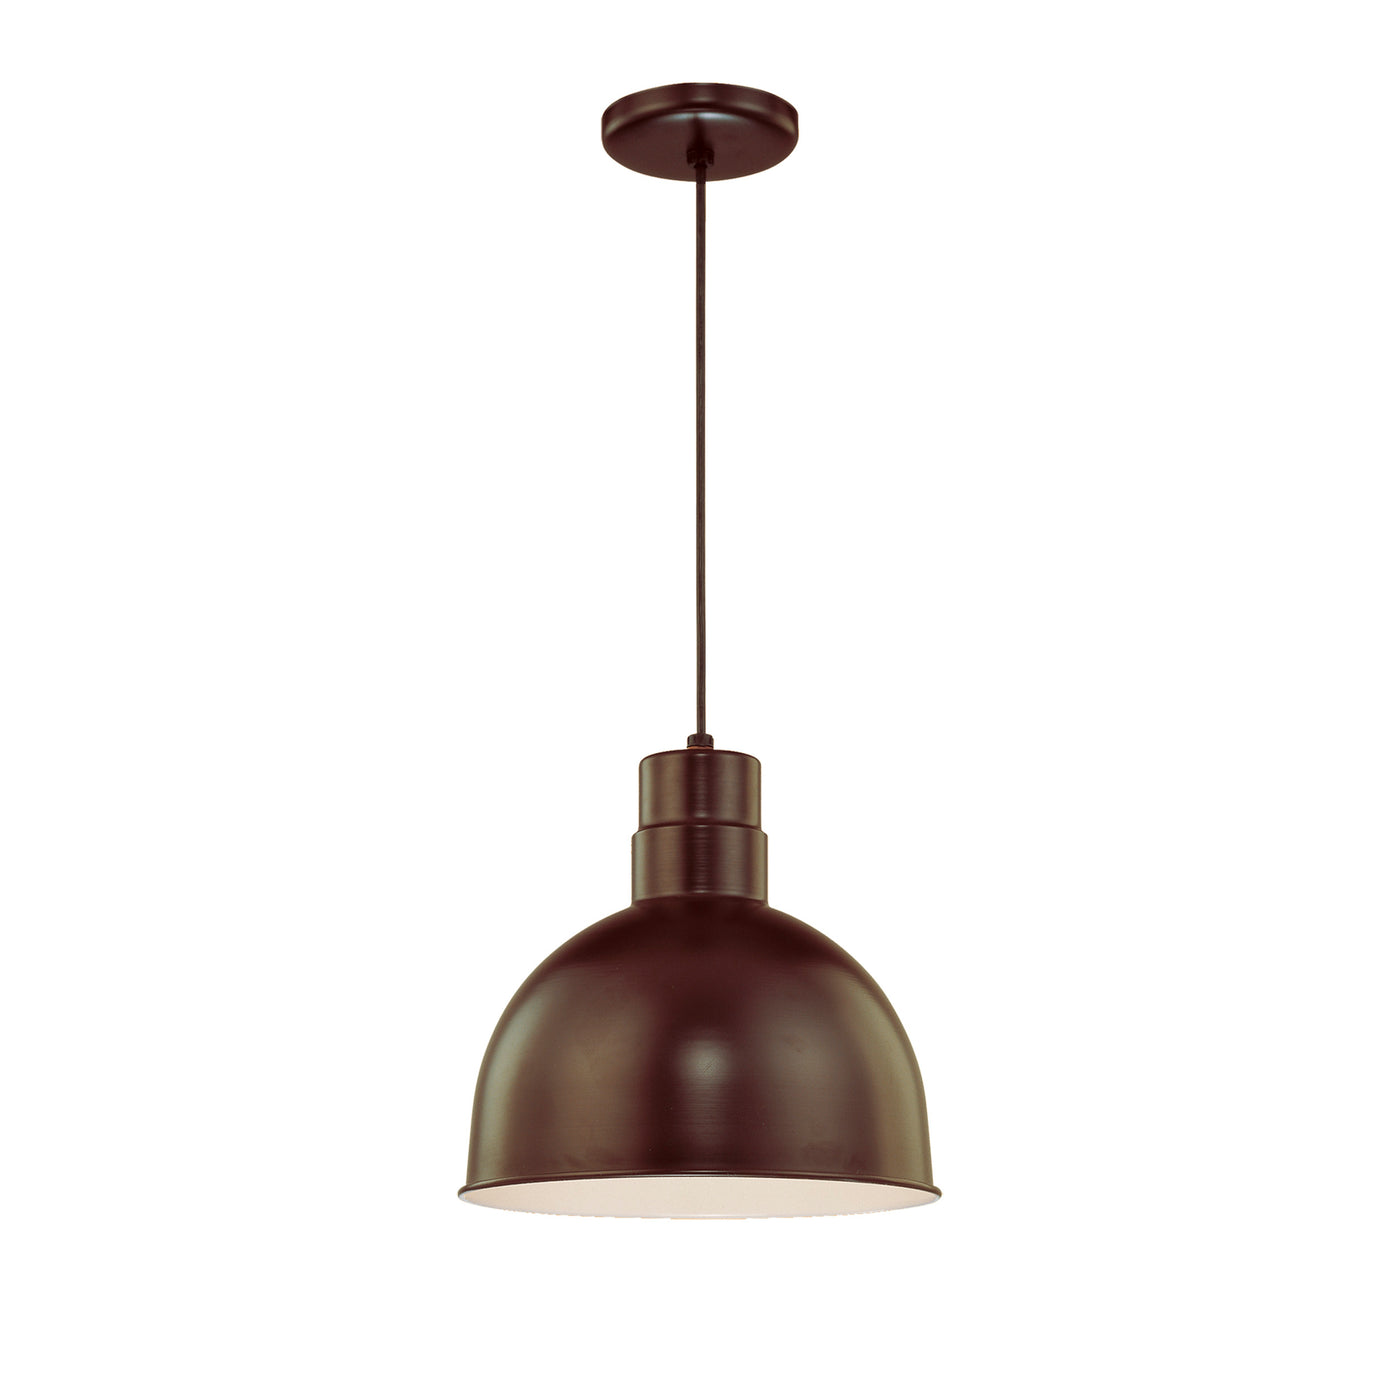 Millennium Lighting Rosemont 10" RLM/ Cord Hung Deep Bowl Shade (Available in Bronze, Galvanized, Black, Red, and Green Finishes)